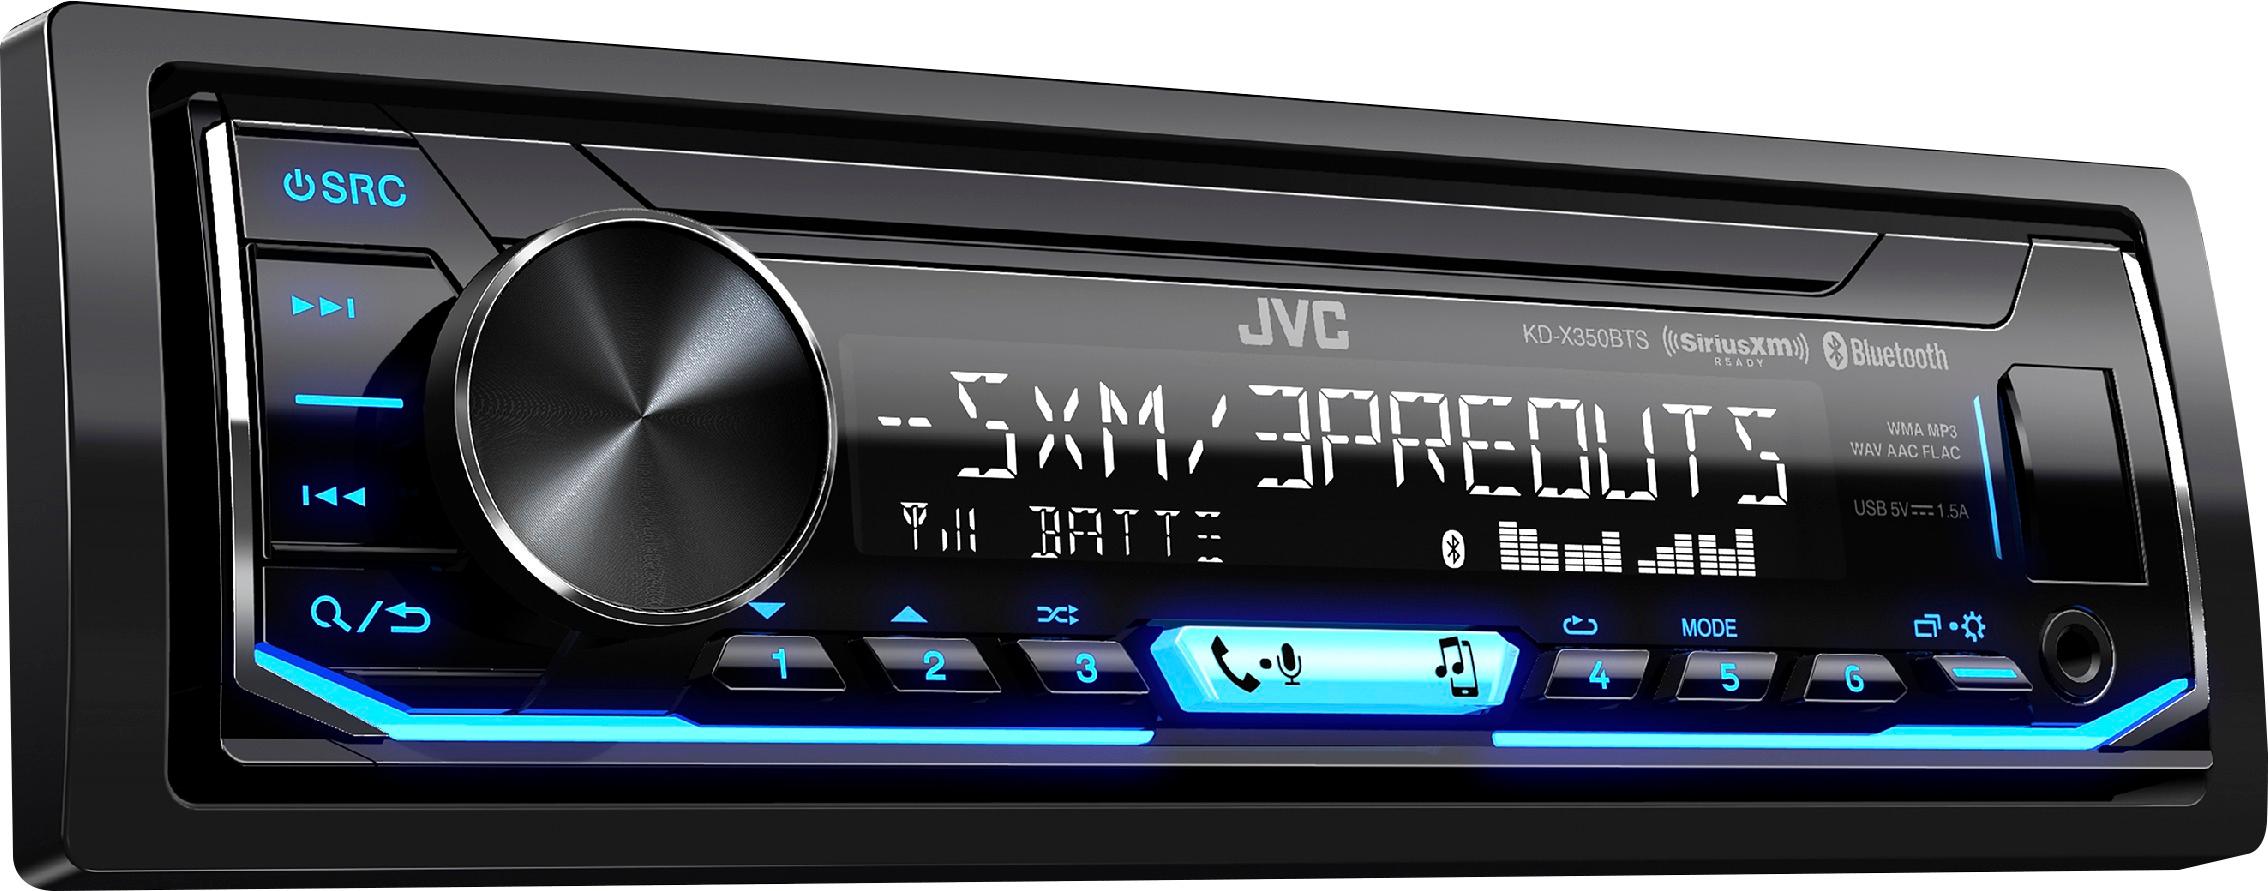 JVC Bluetooth CD/DM Receiver with Voice Assistant Built in and Satellite  Radio Ready Black KW-R950BTS - Best Buy